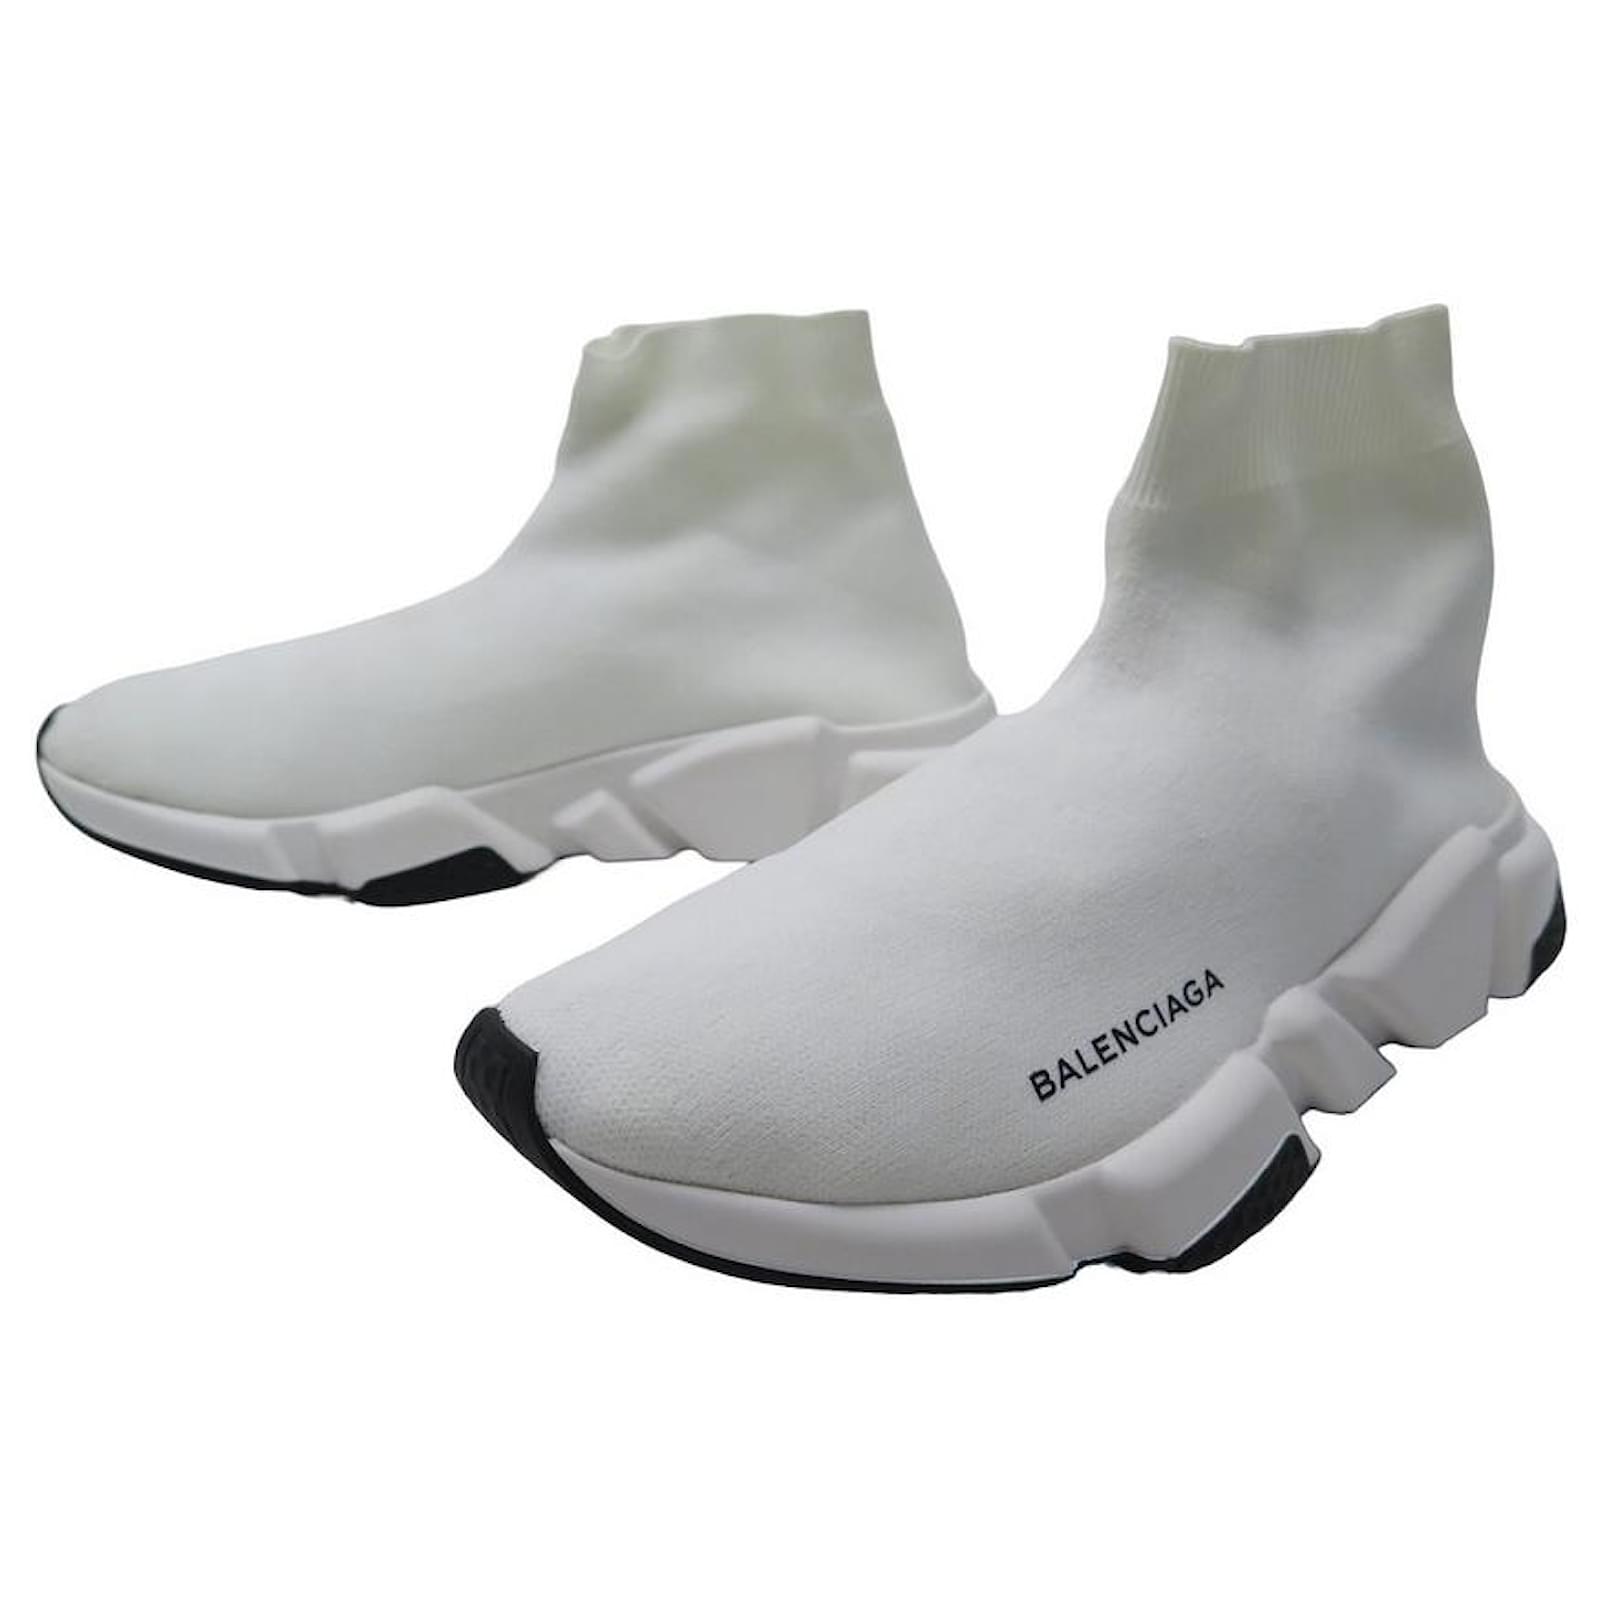 bag mærke fryser NEW BALENCIAGA SPEED TRAINER WHITE SHOES 41 494371 SNEAKERS SHOES Cloth  ref.881516 - Joli Closet